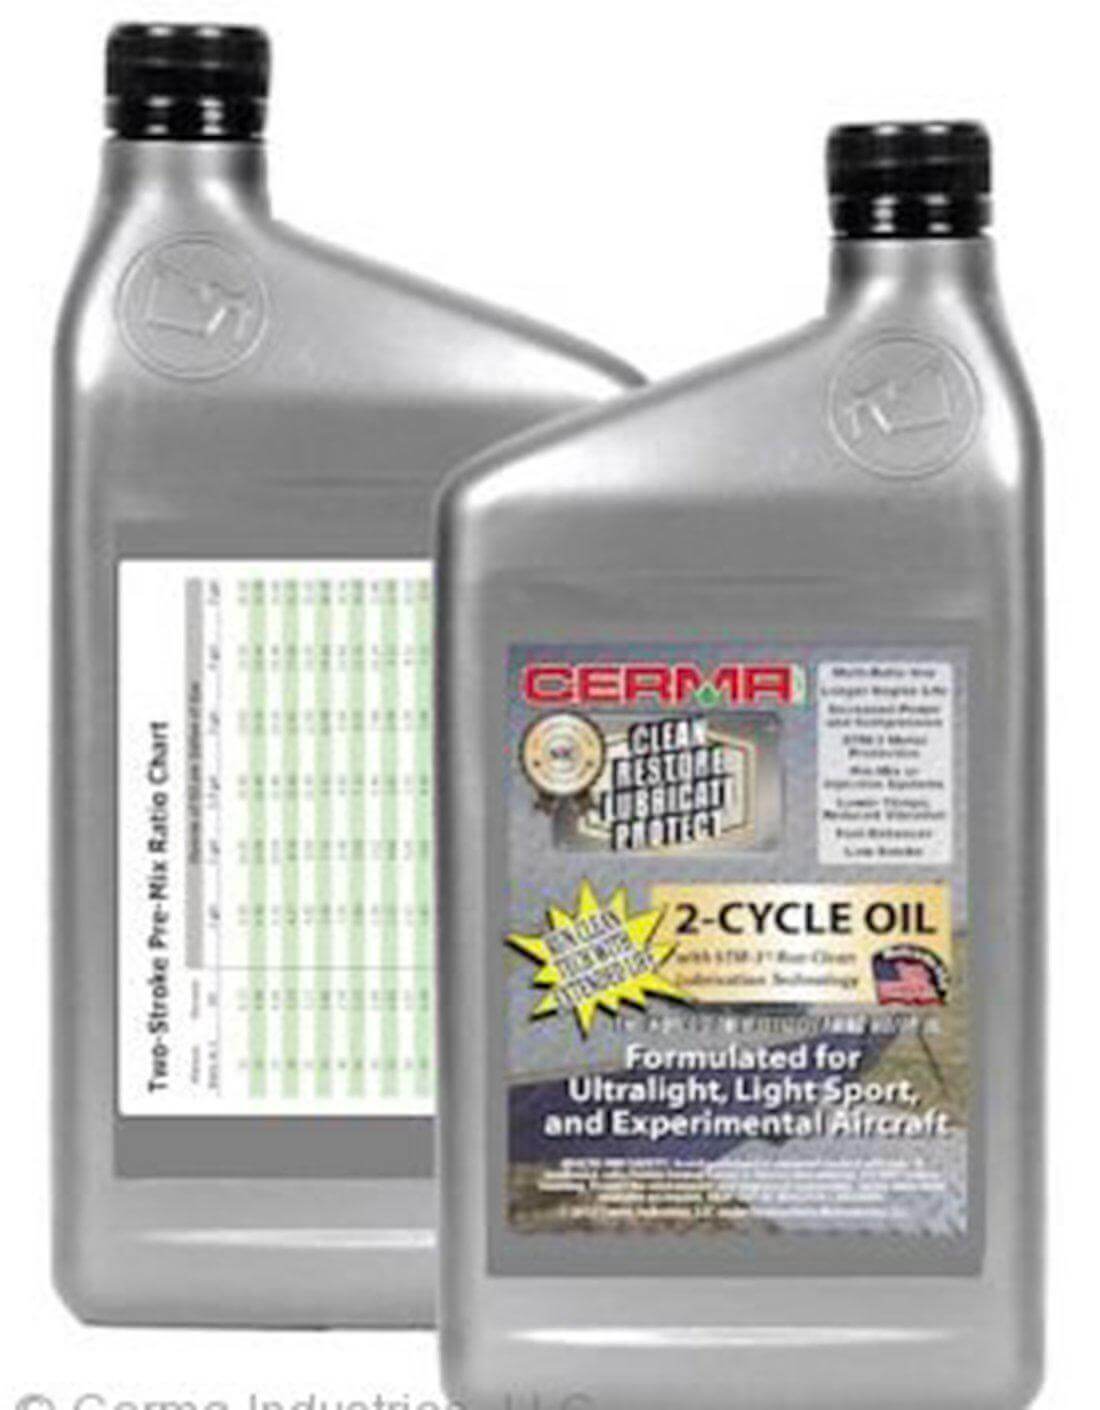 Cermax Air Ceramic 2-Cycle Multi-Ratio Oil at $26.25 only from cermatreatment.com